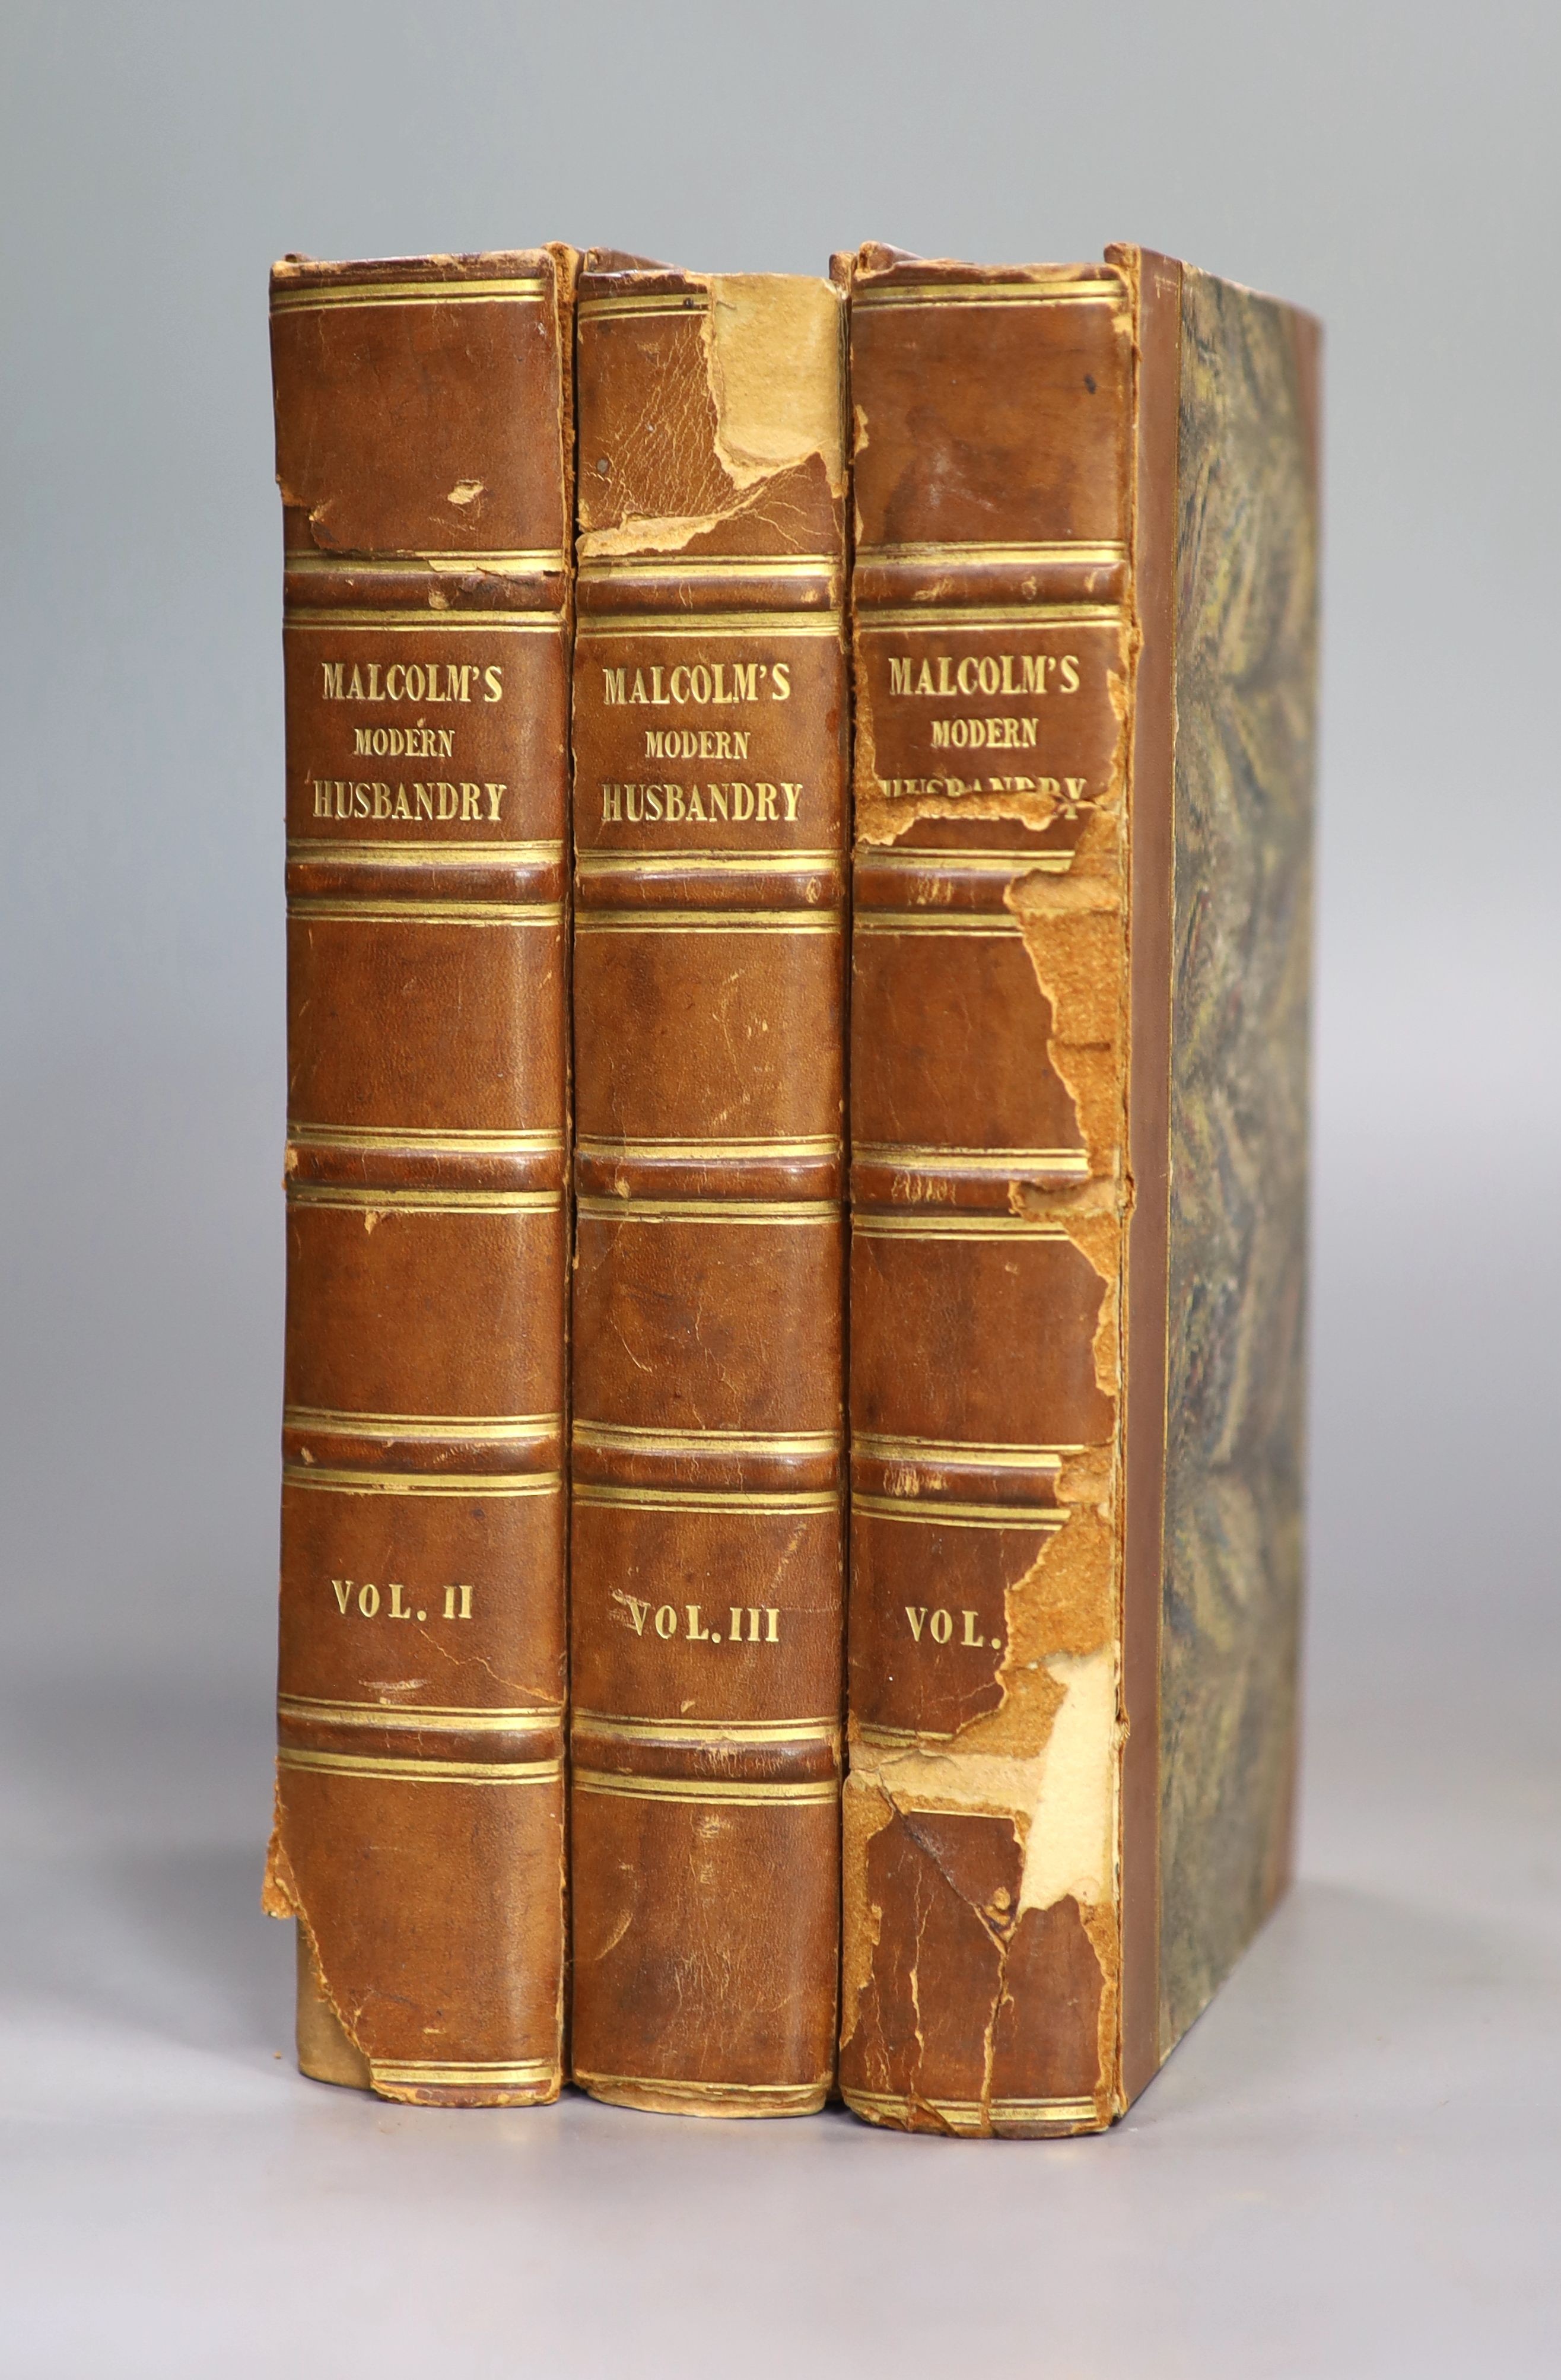 Malcolm, James - A Compendium of Modern Husbandry, Principally written during a Survey of Surrey, 3 vols, 8vo, half calf, spines brittle and with loss, with folding coloured map and 7 plates, London, 1805